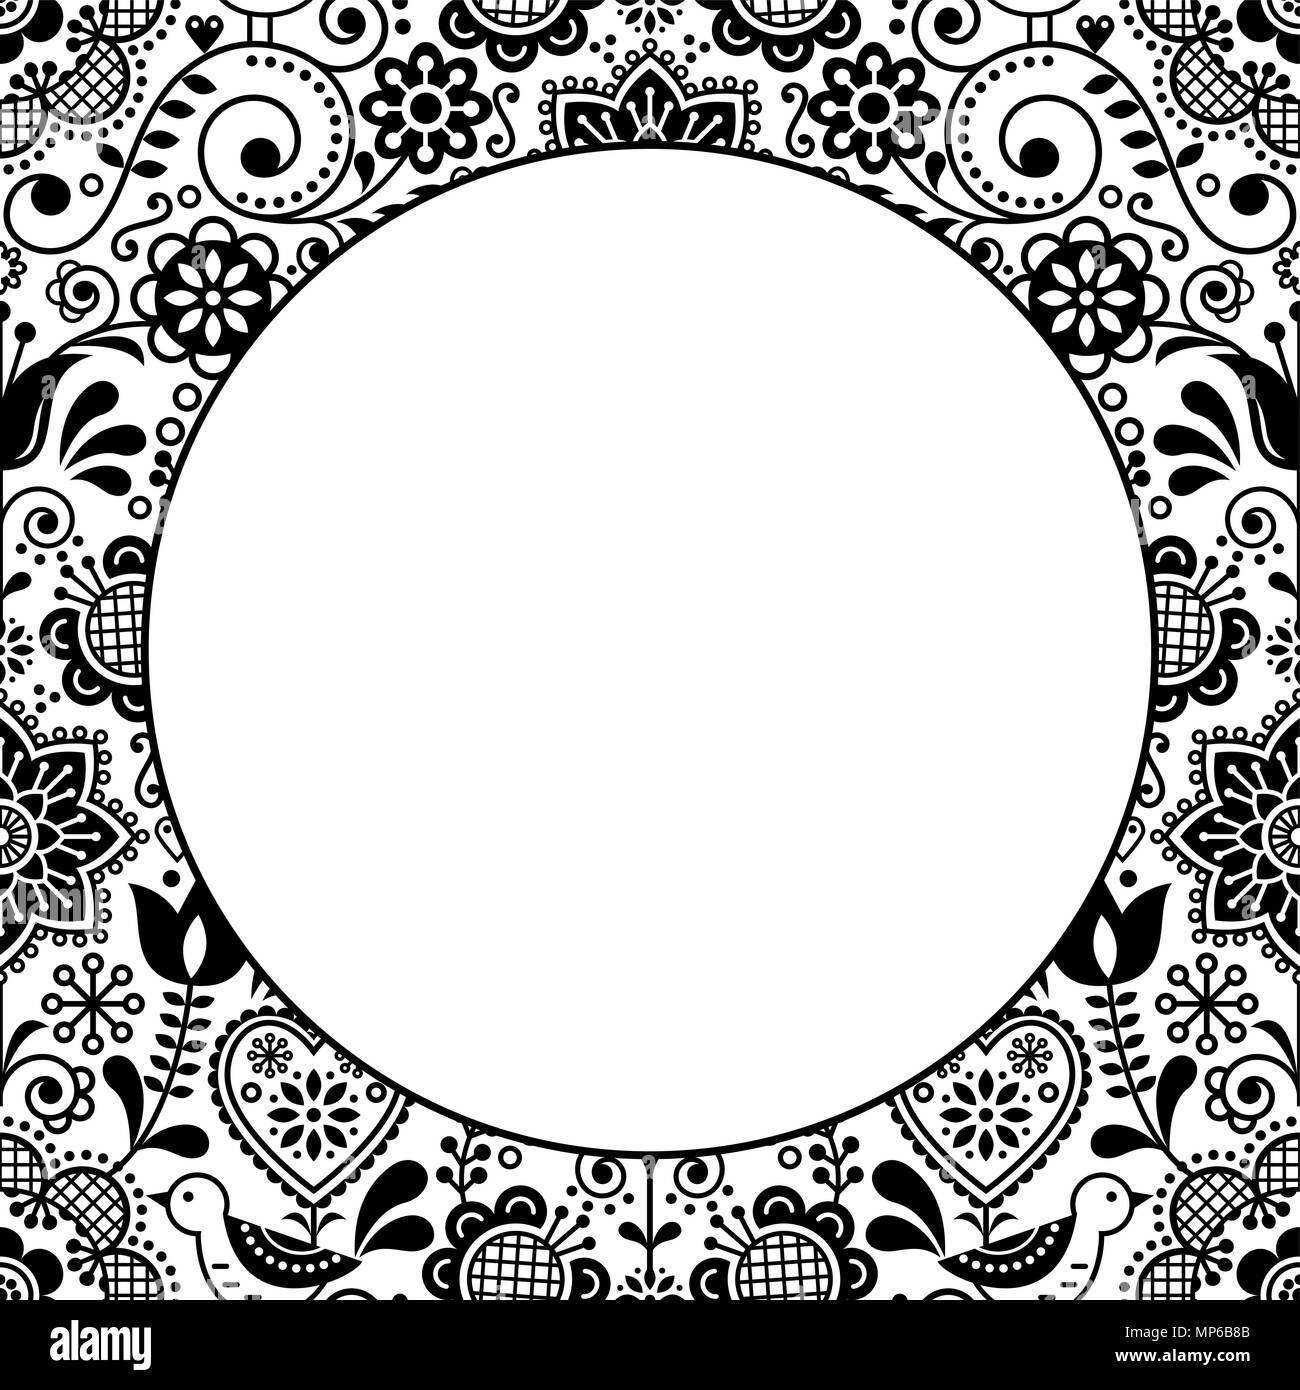 Scandinavian folk heart design greeting card or birthday or wedding invitation, floral vector pattern in black and white Stock Vector